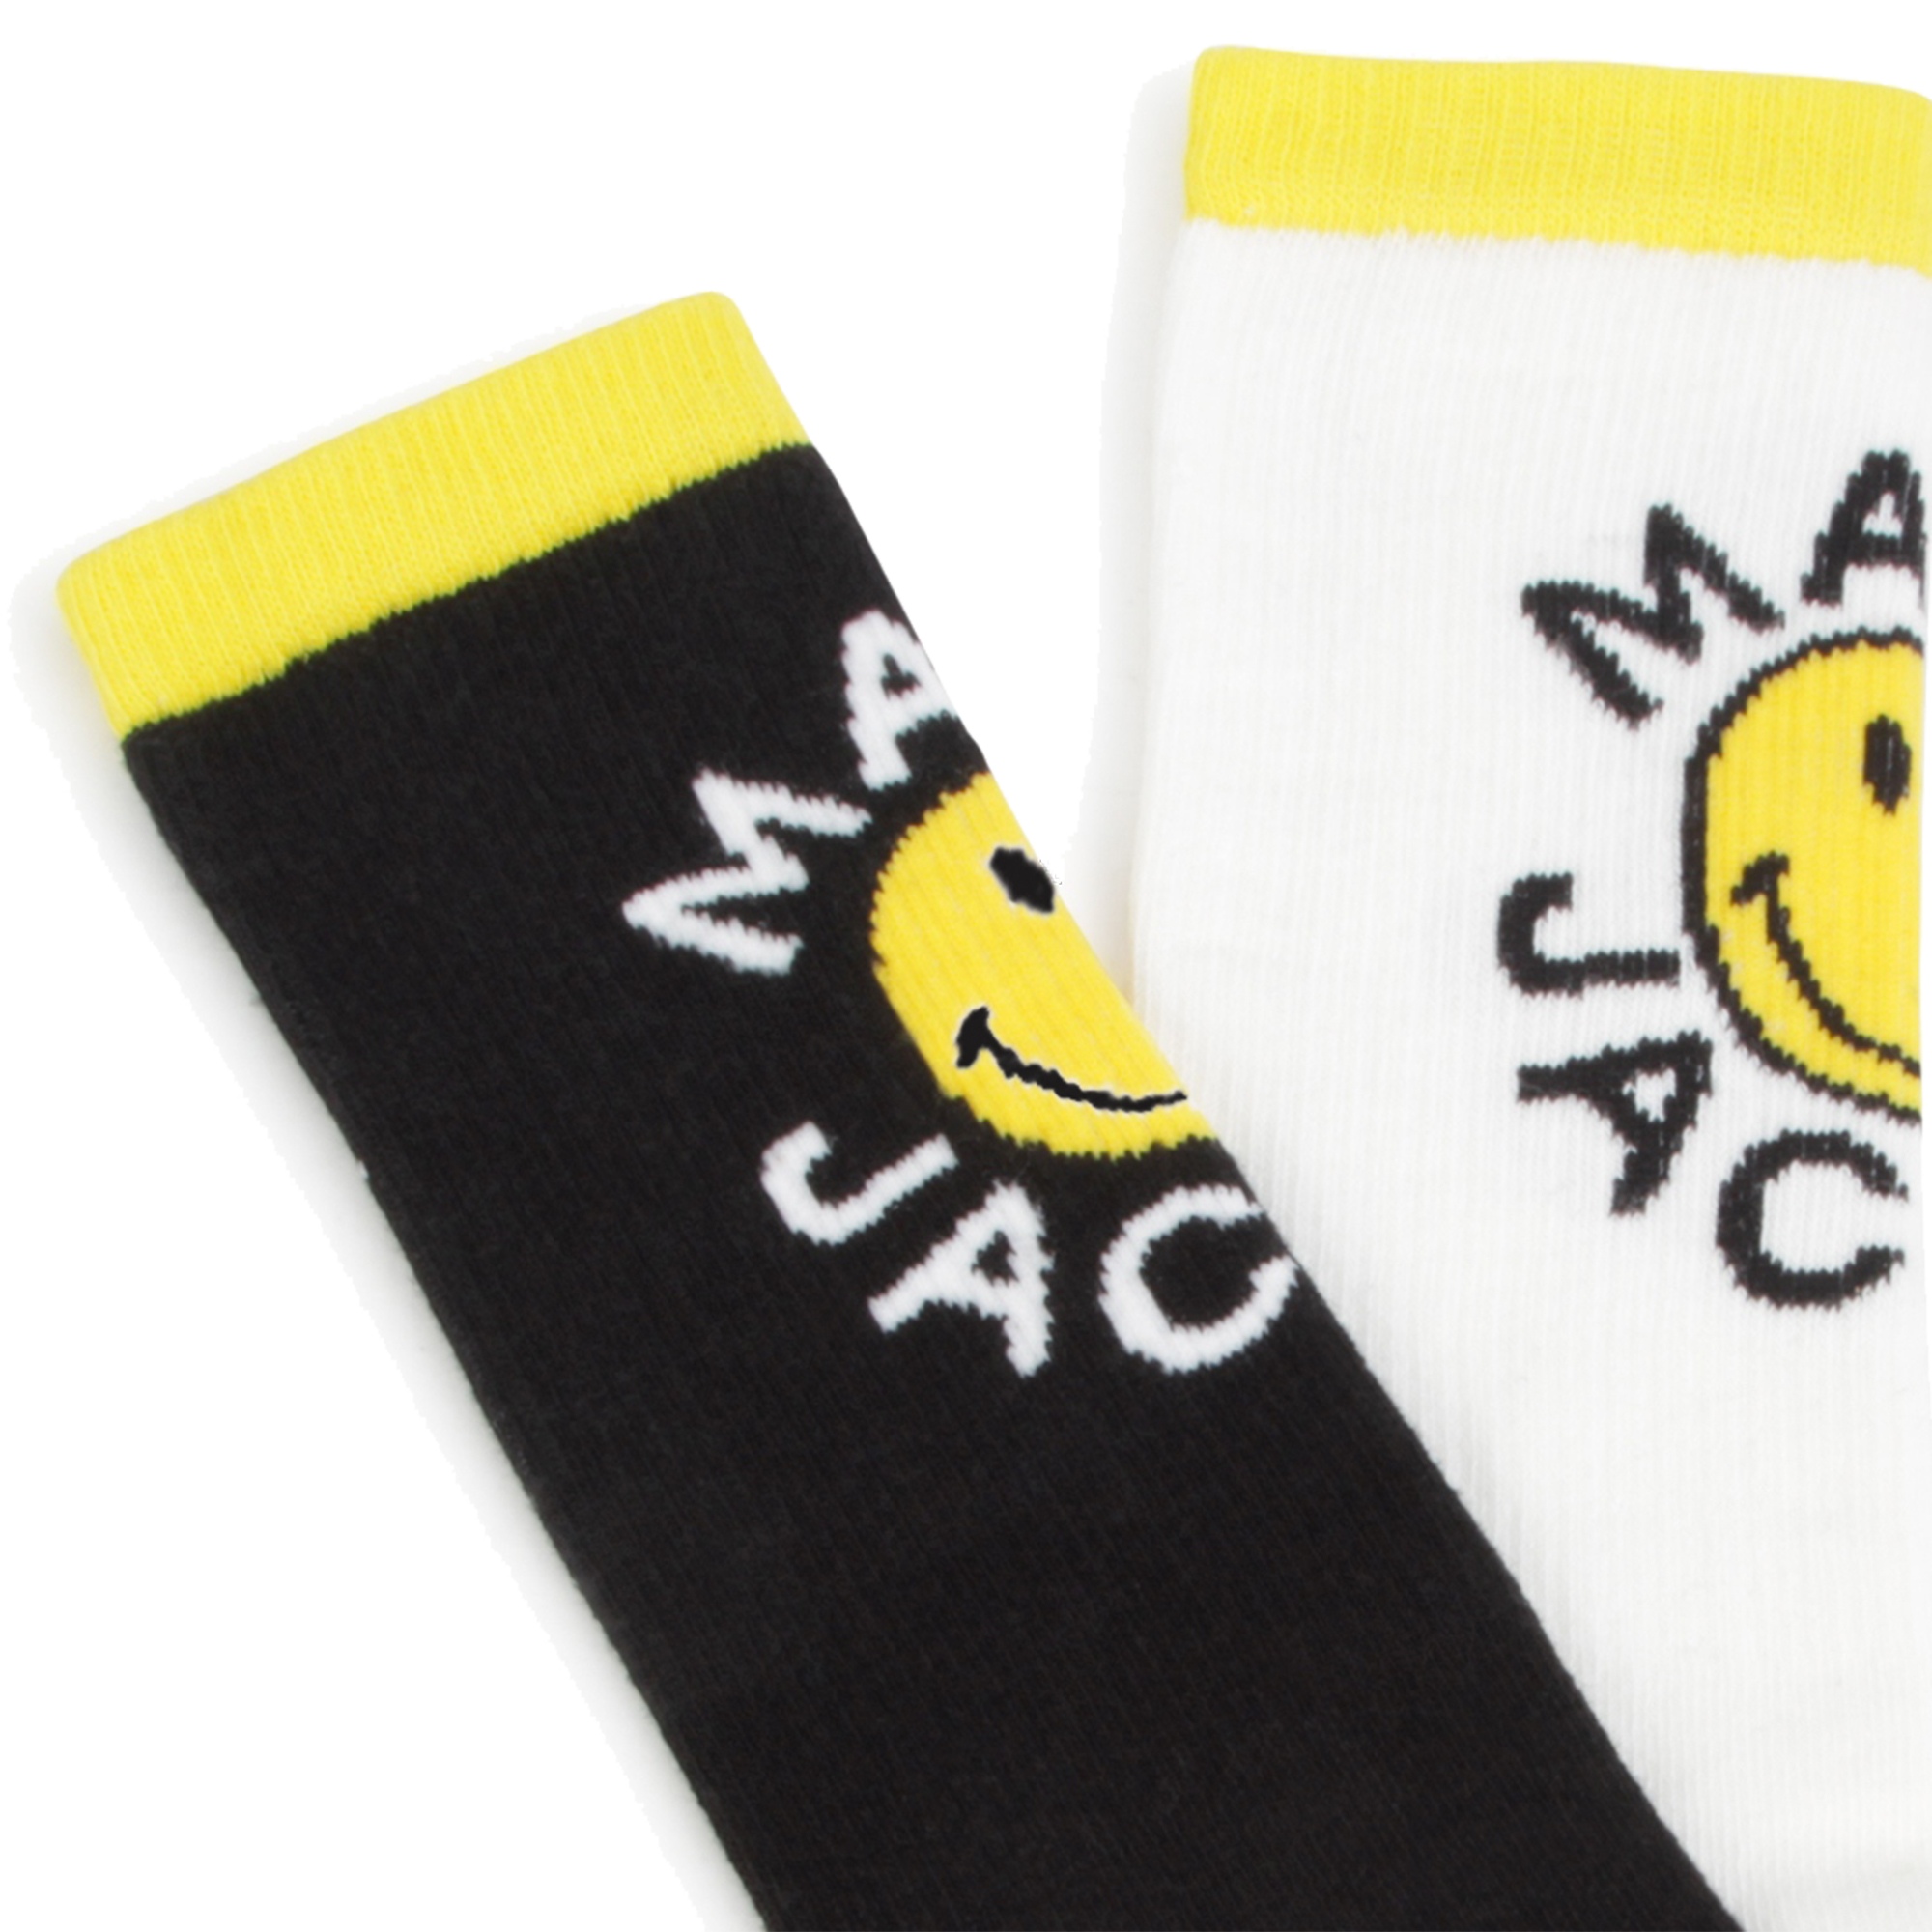 Calze lunghe smiley MARC JACOBS Per UNISEX